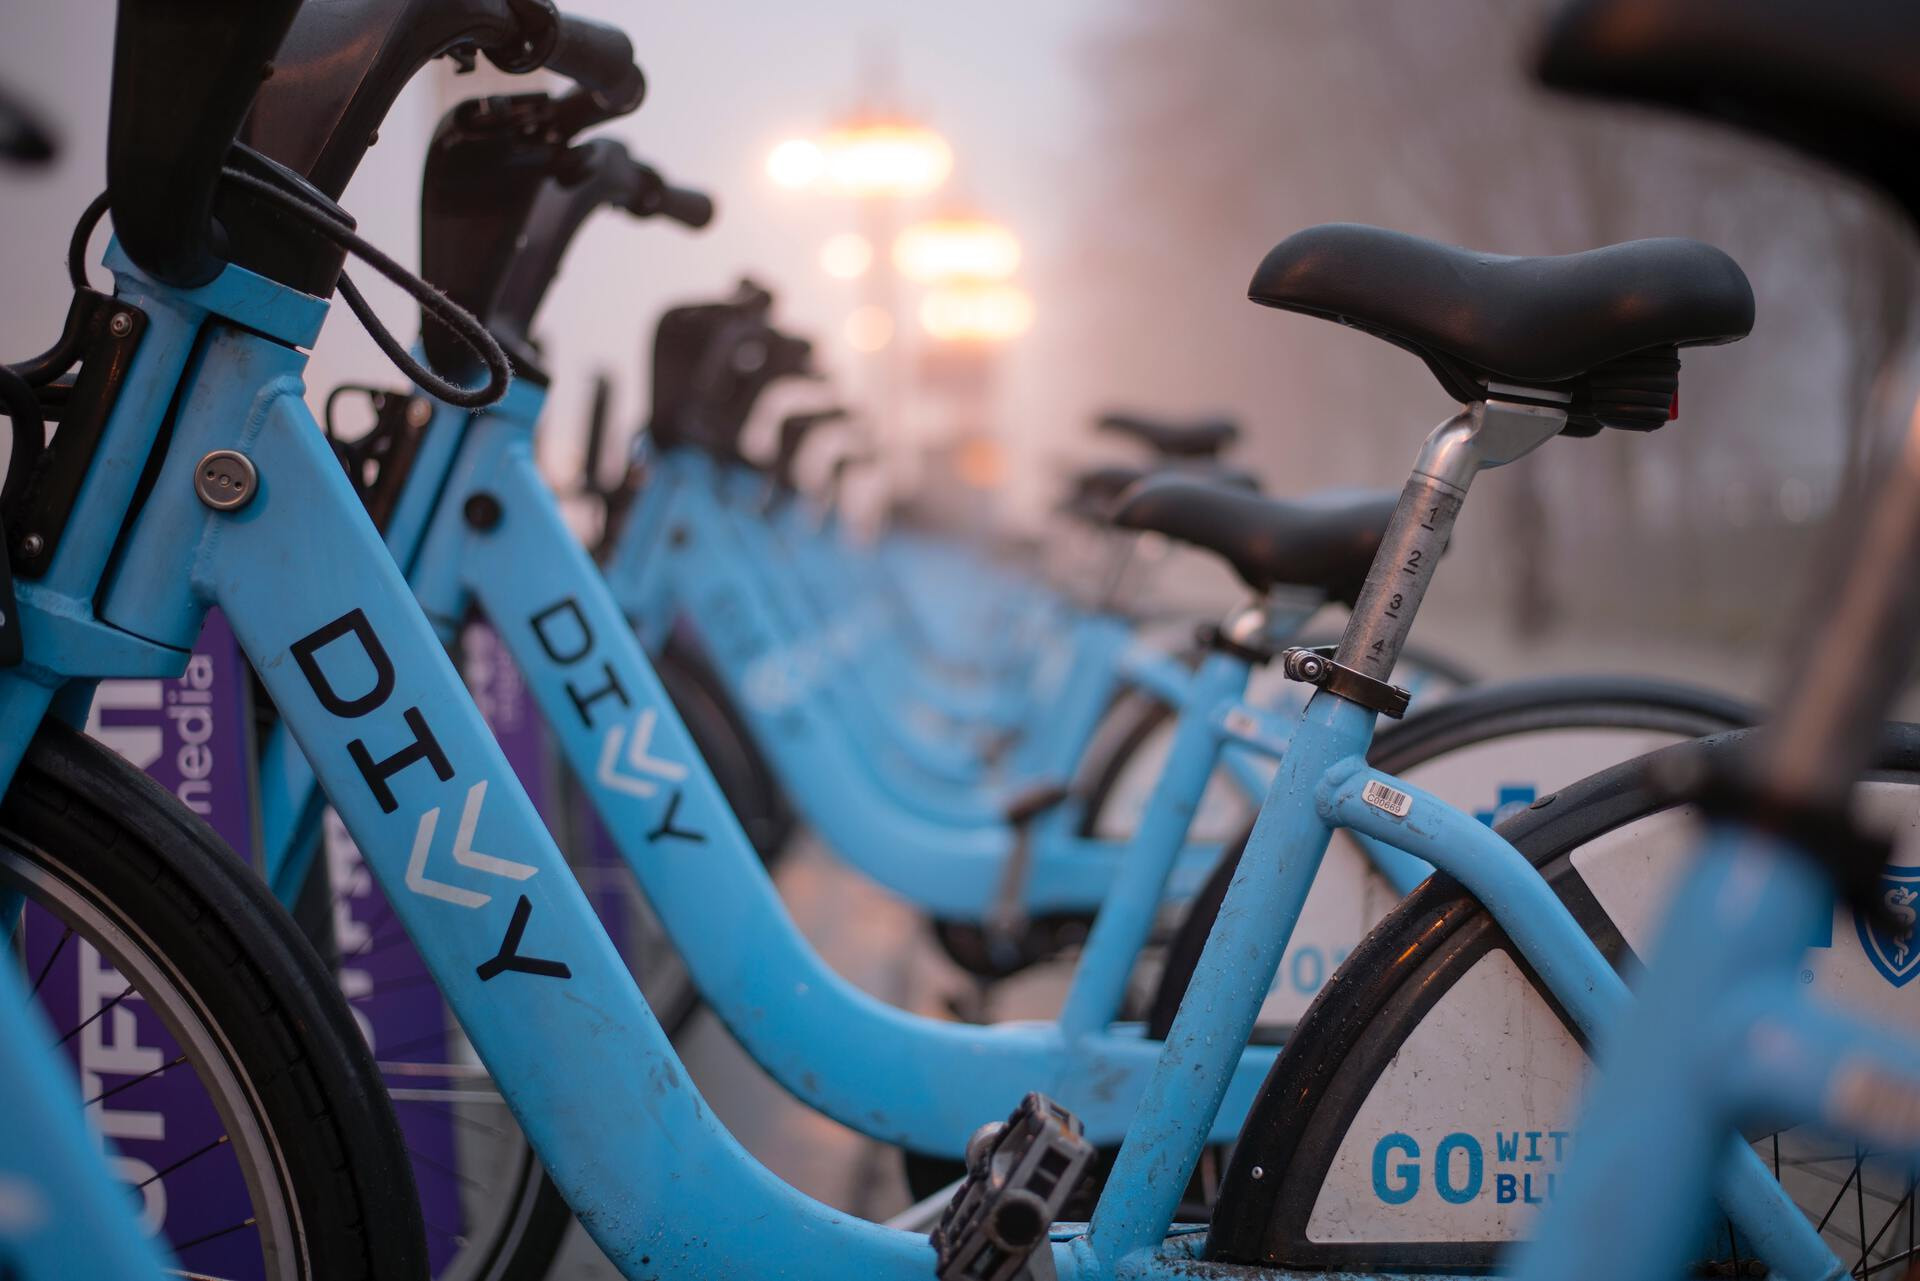 Blue colored station-based sharing bikes standing next to each other.